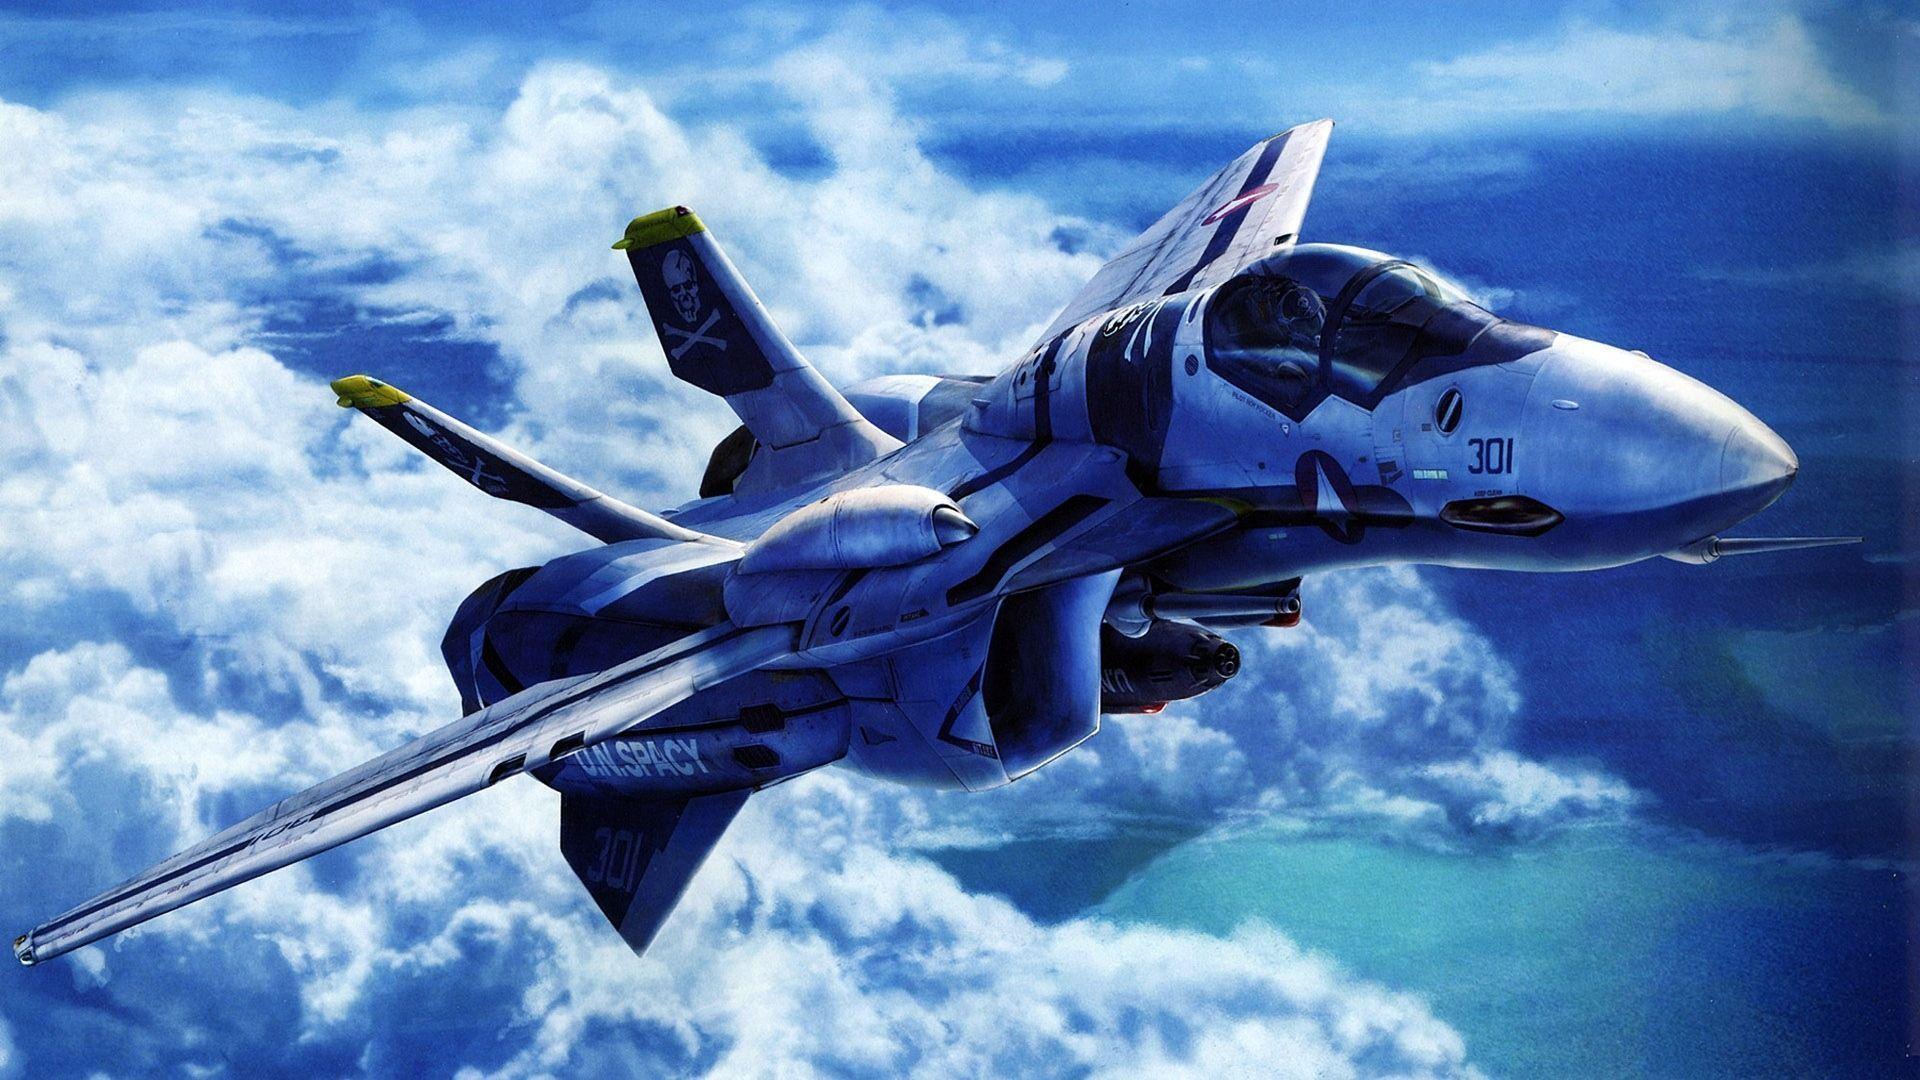 Fighter Jets Airplane Wallpaper HD. Hdwidescreens